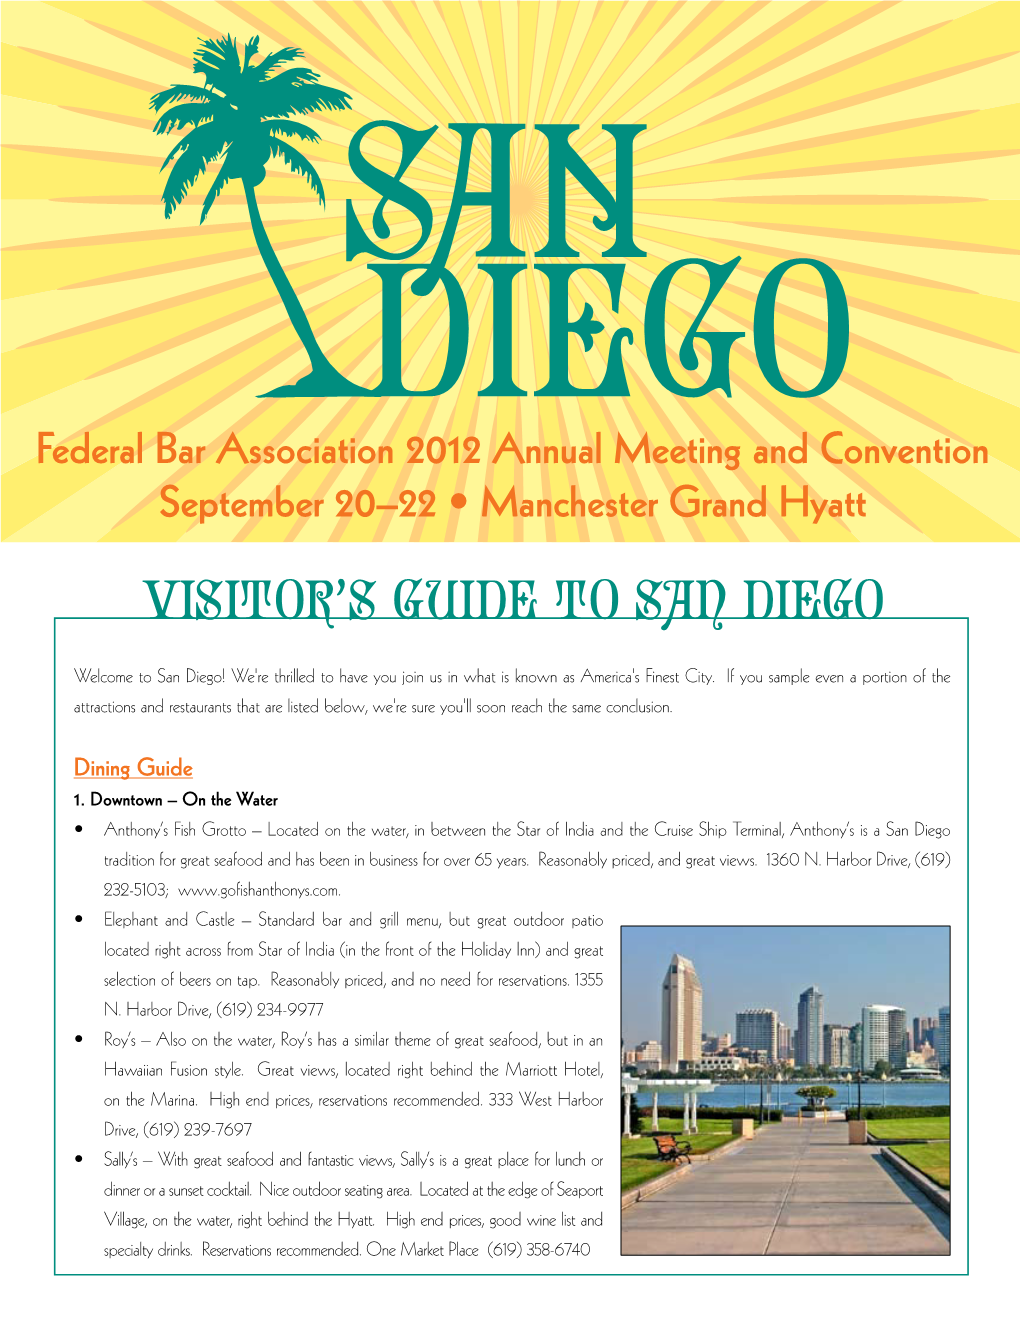 Visitor's Guide to San Diego